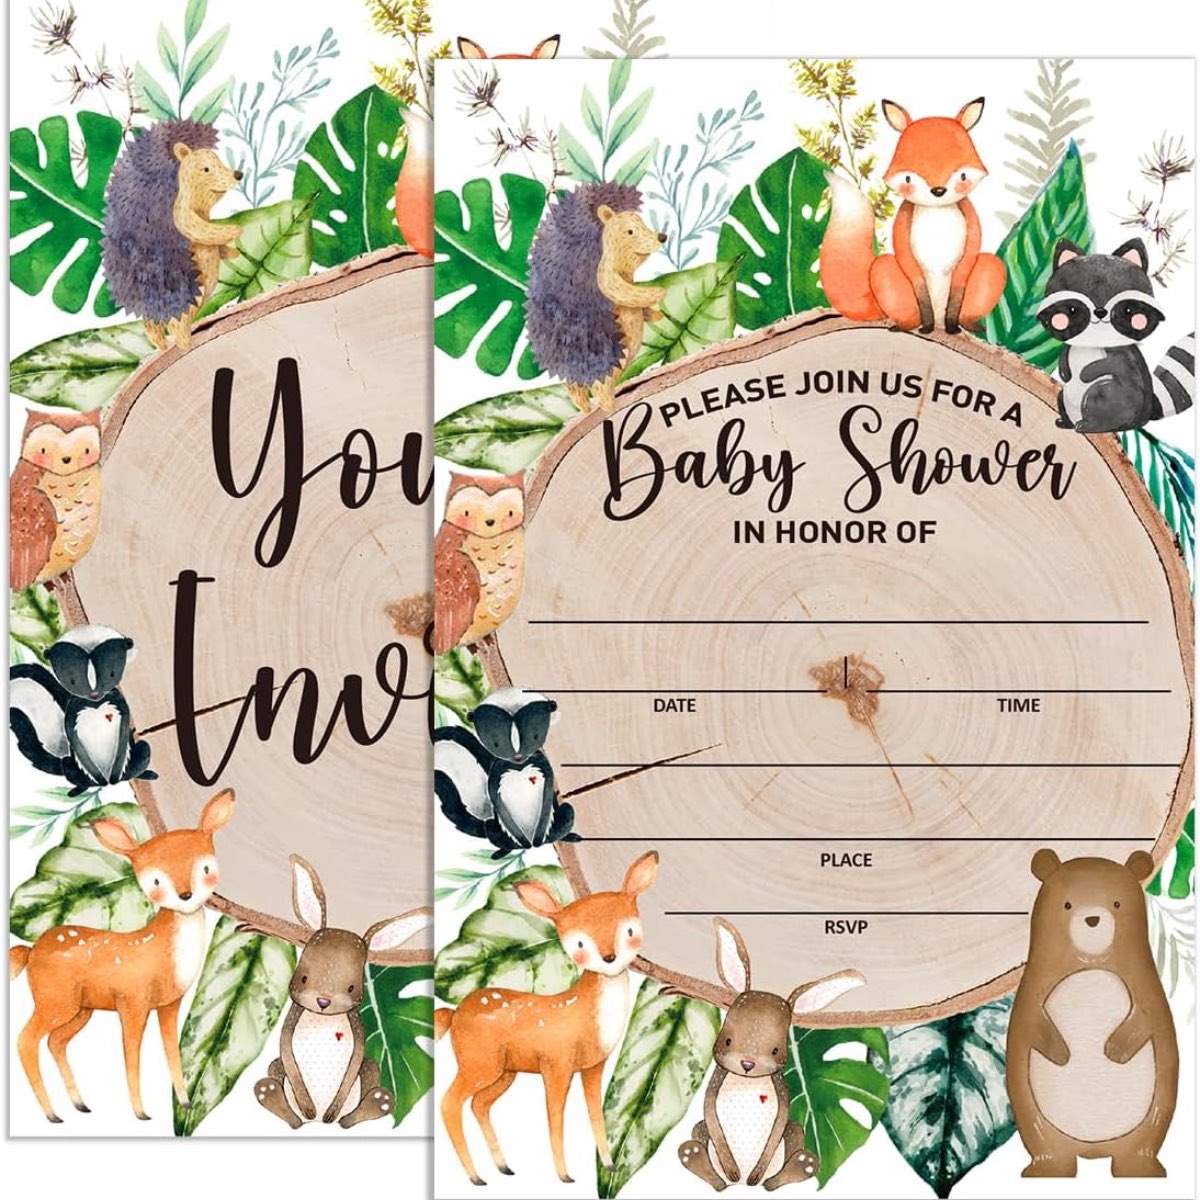 How to Throw a Woodland Animals Baby Shower - Ultimate Guide - Decorations - Supplies - Food - Drink - Games - Ideas - Inspiration